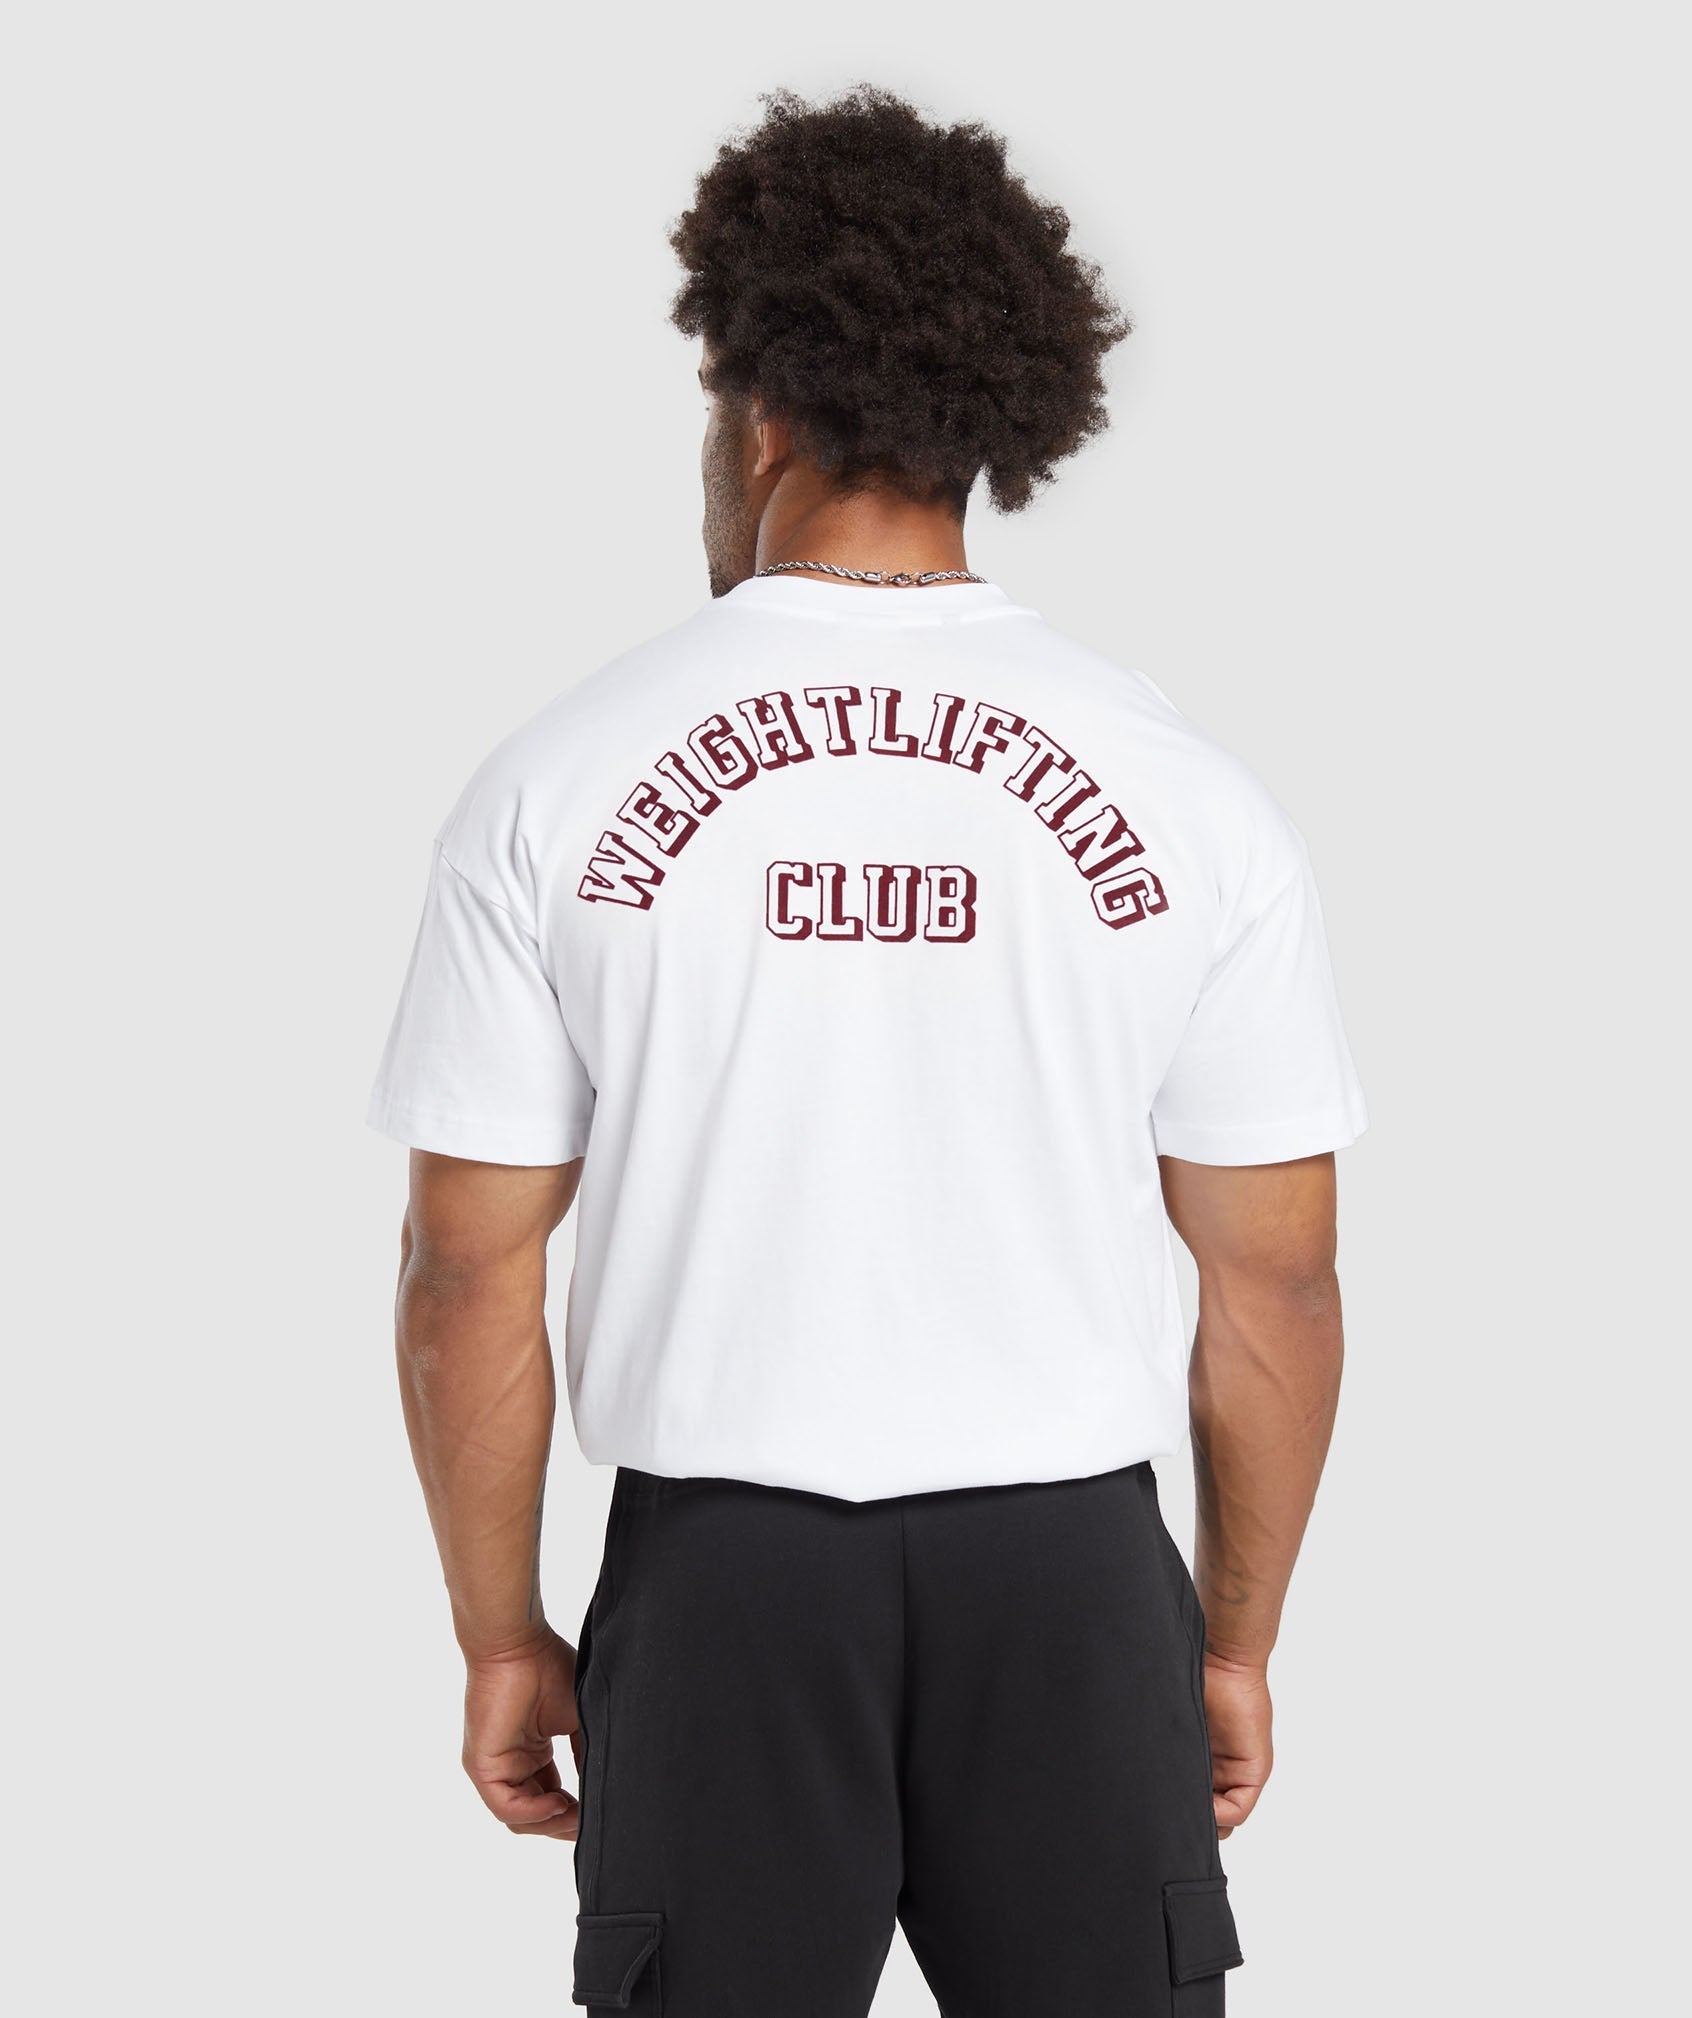 Weightlifting Club T-Shirt in White - view 1